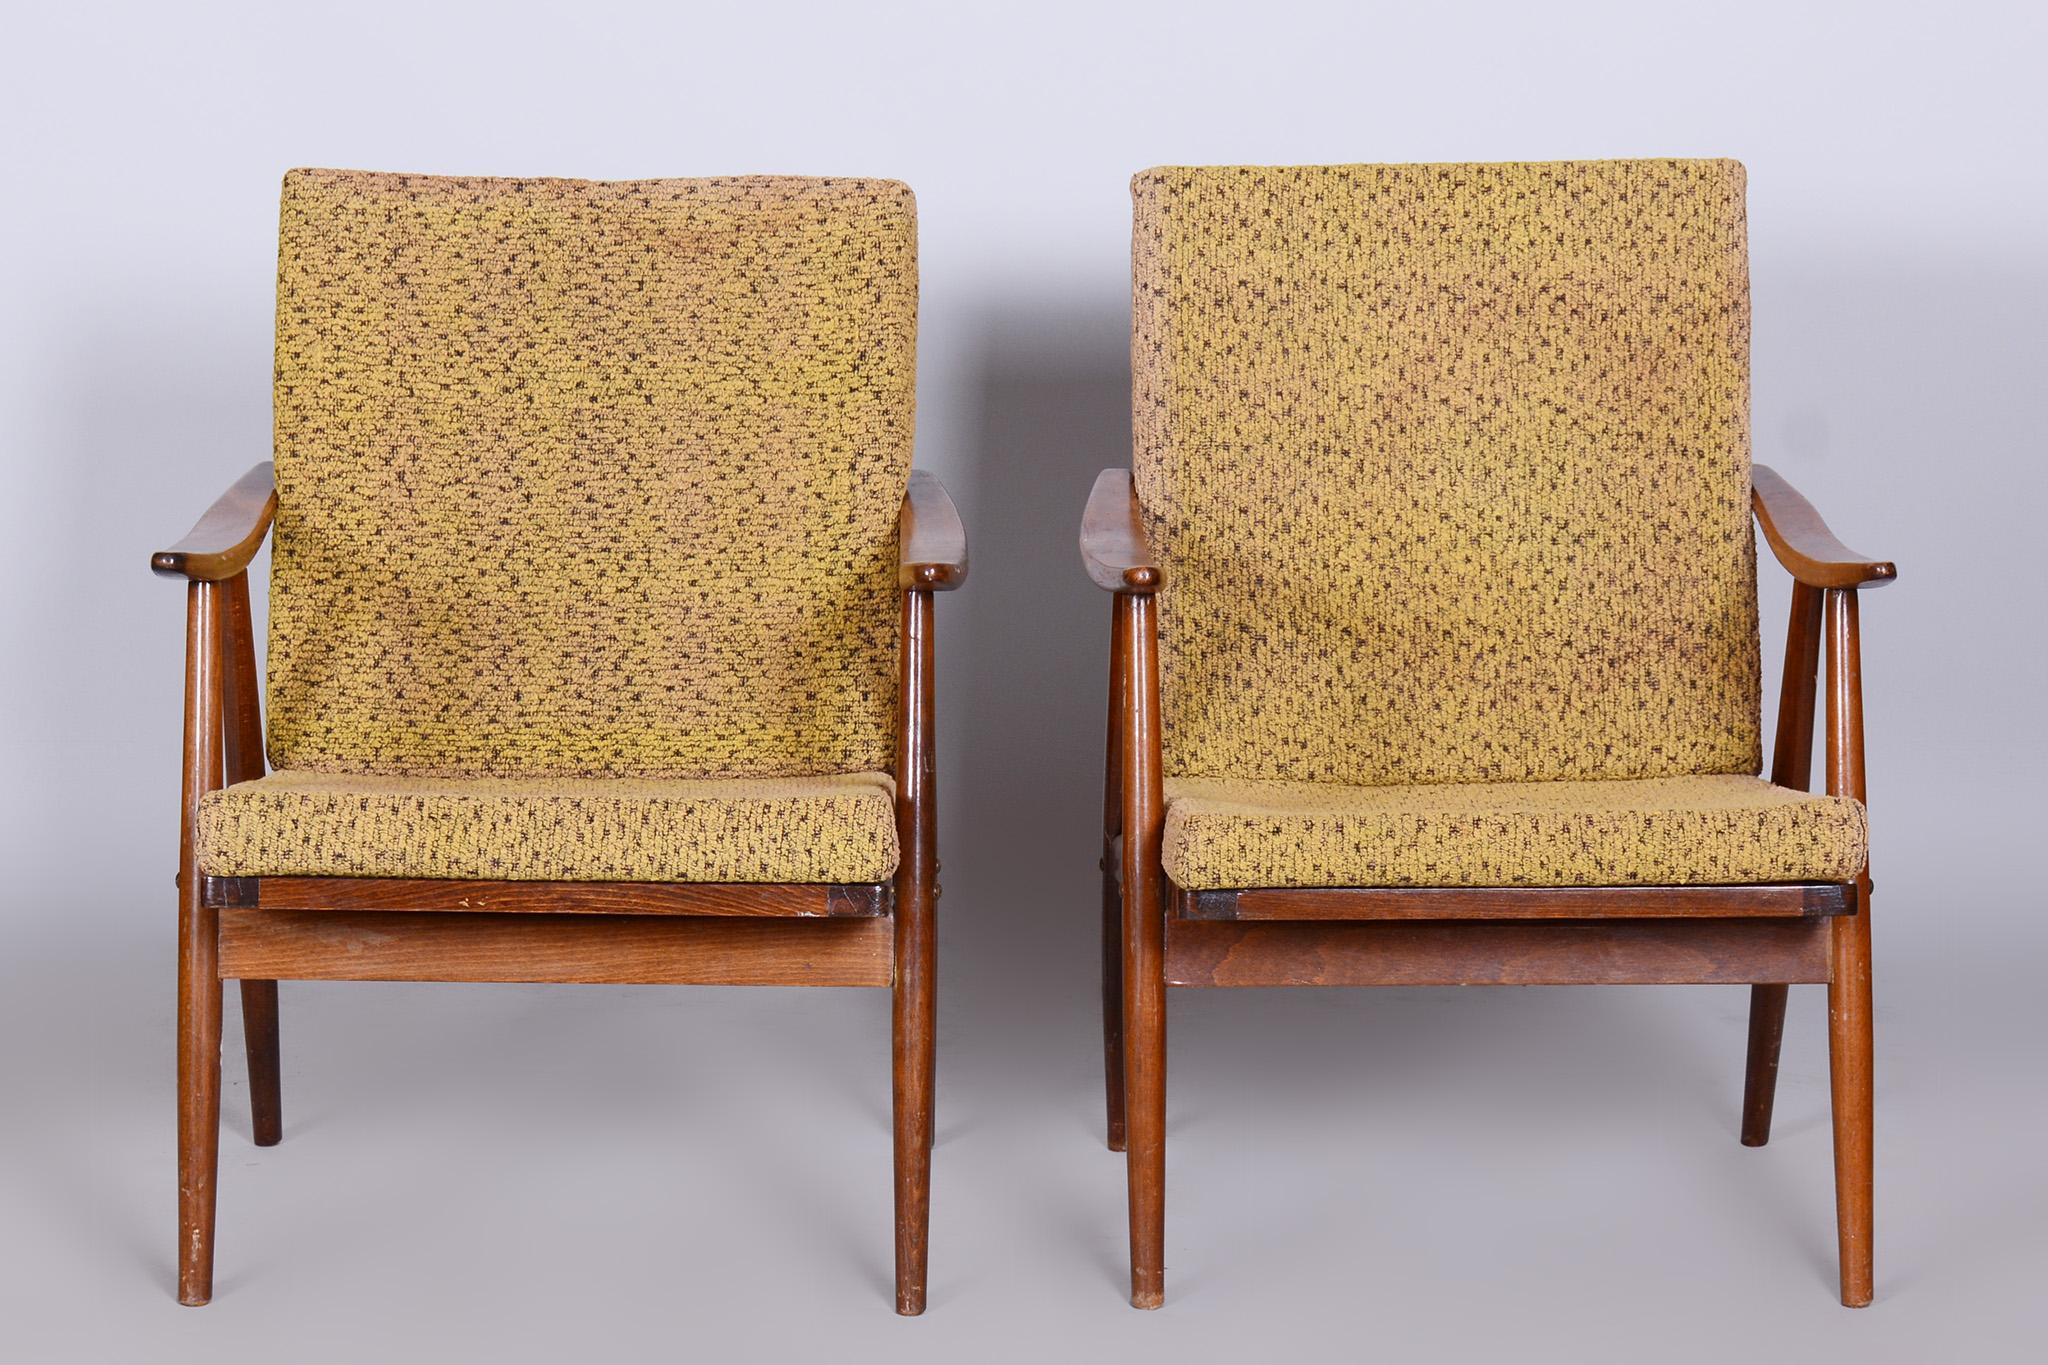 Pair of Midcentury Beech Armchairs, Úluv, Revived Polish, Czechia, 1960s For Sale 1